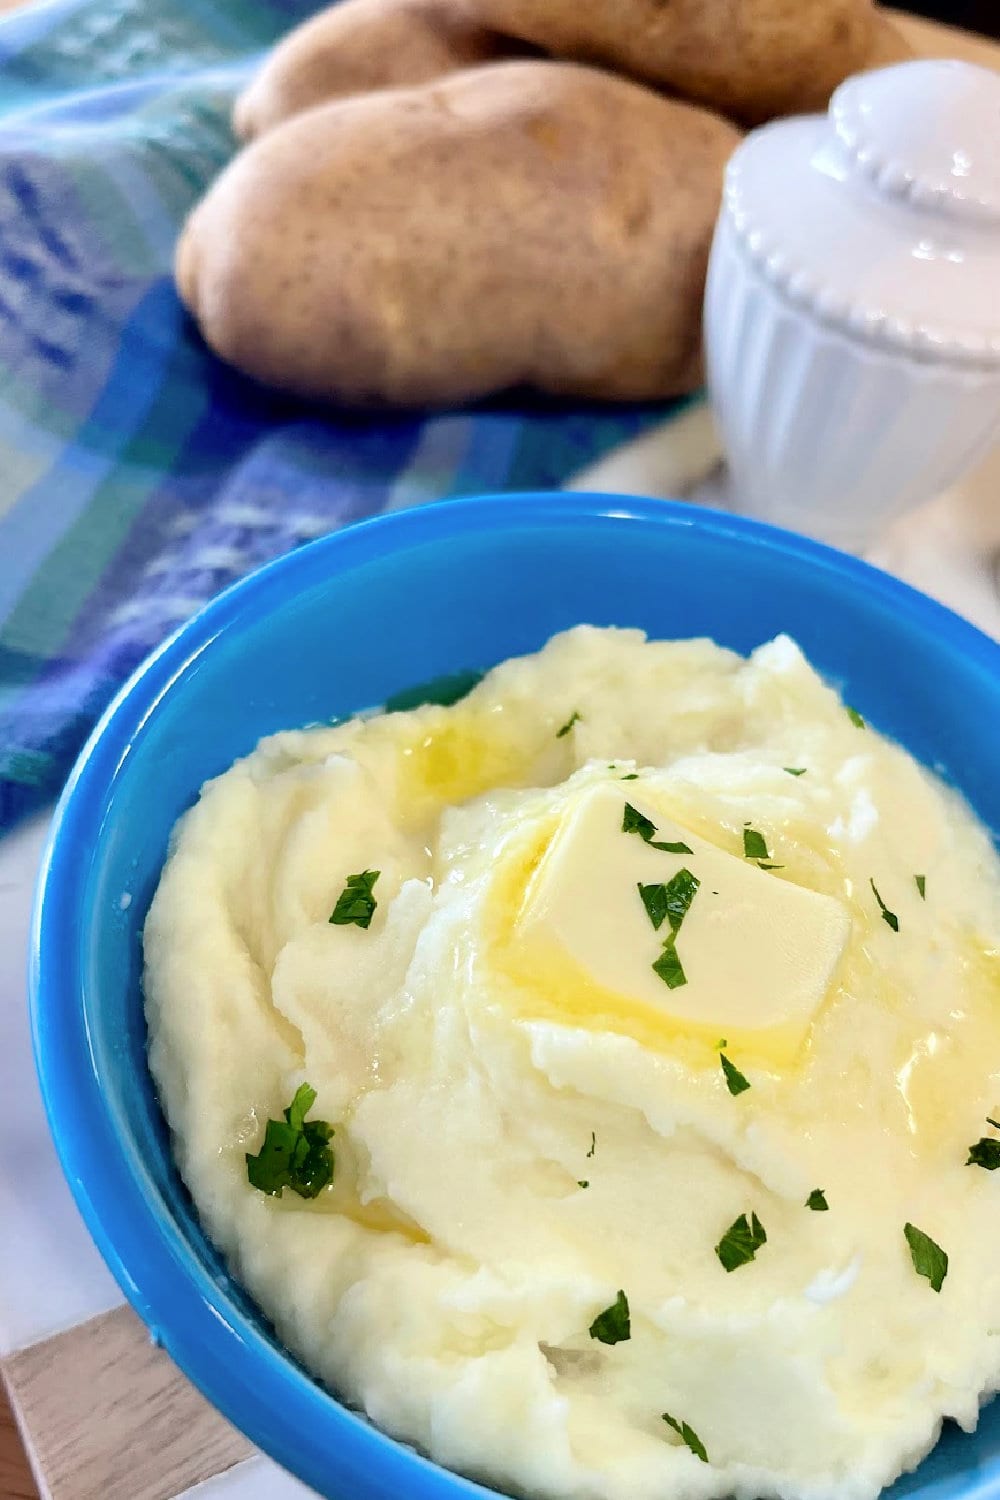 Mashed potatoes piled high in a blue bowl. 